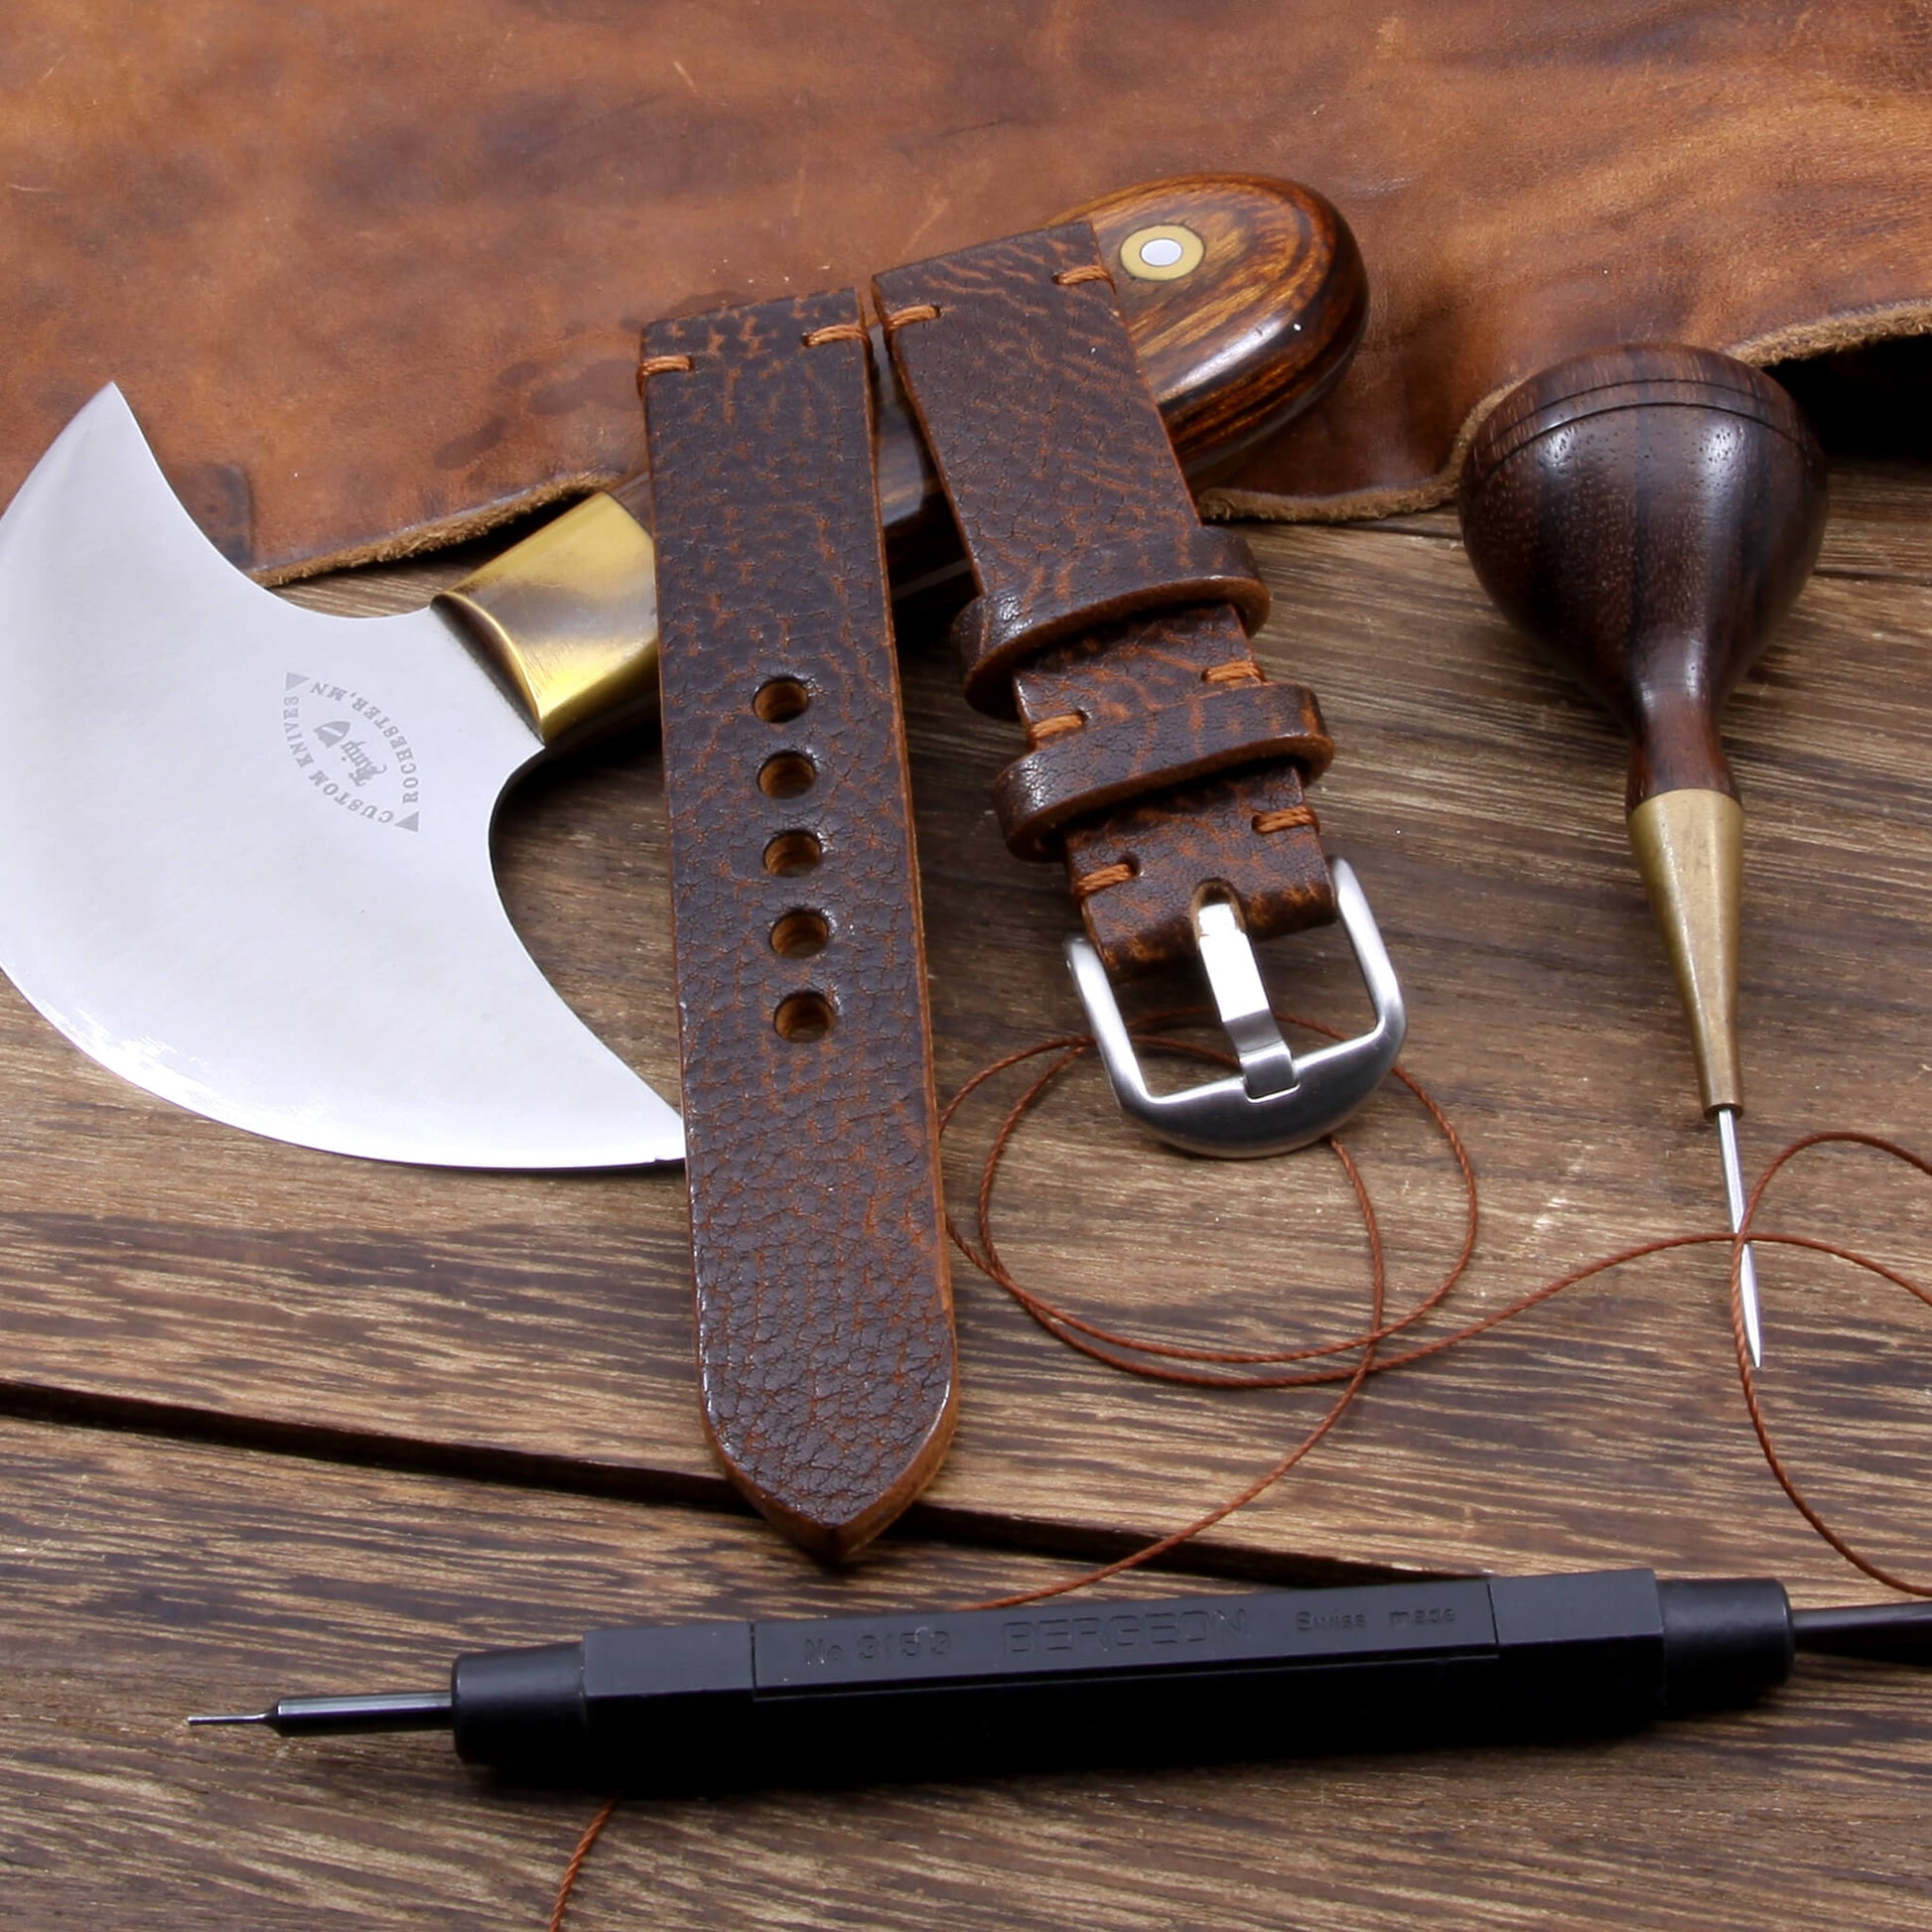 mbrace the natural: Gobi Cognac leather Apple Watch strap, showcasing the rustic beauty of Italian veg-t tan leather.